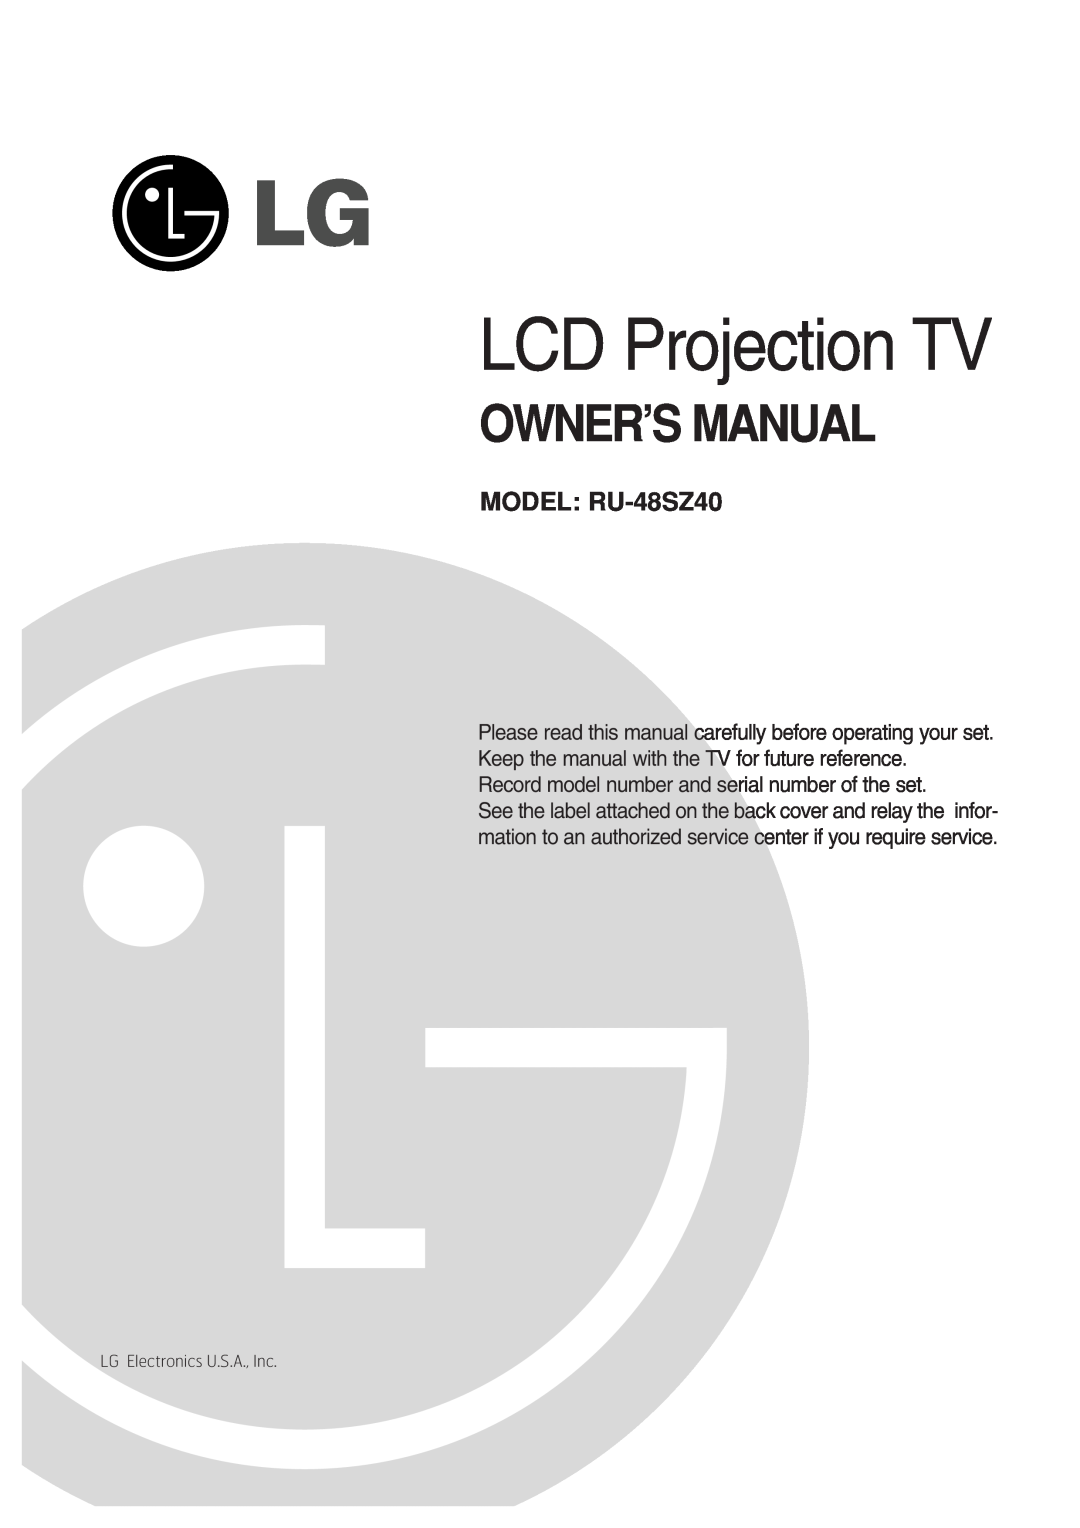 LG Electronics owner manual LCD Projection TV, Owner’S Manual, MODEL RU-48SZ40 